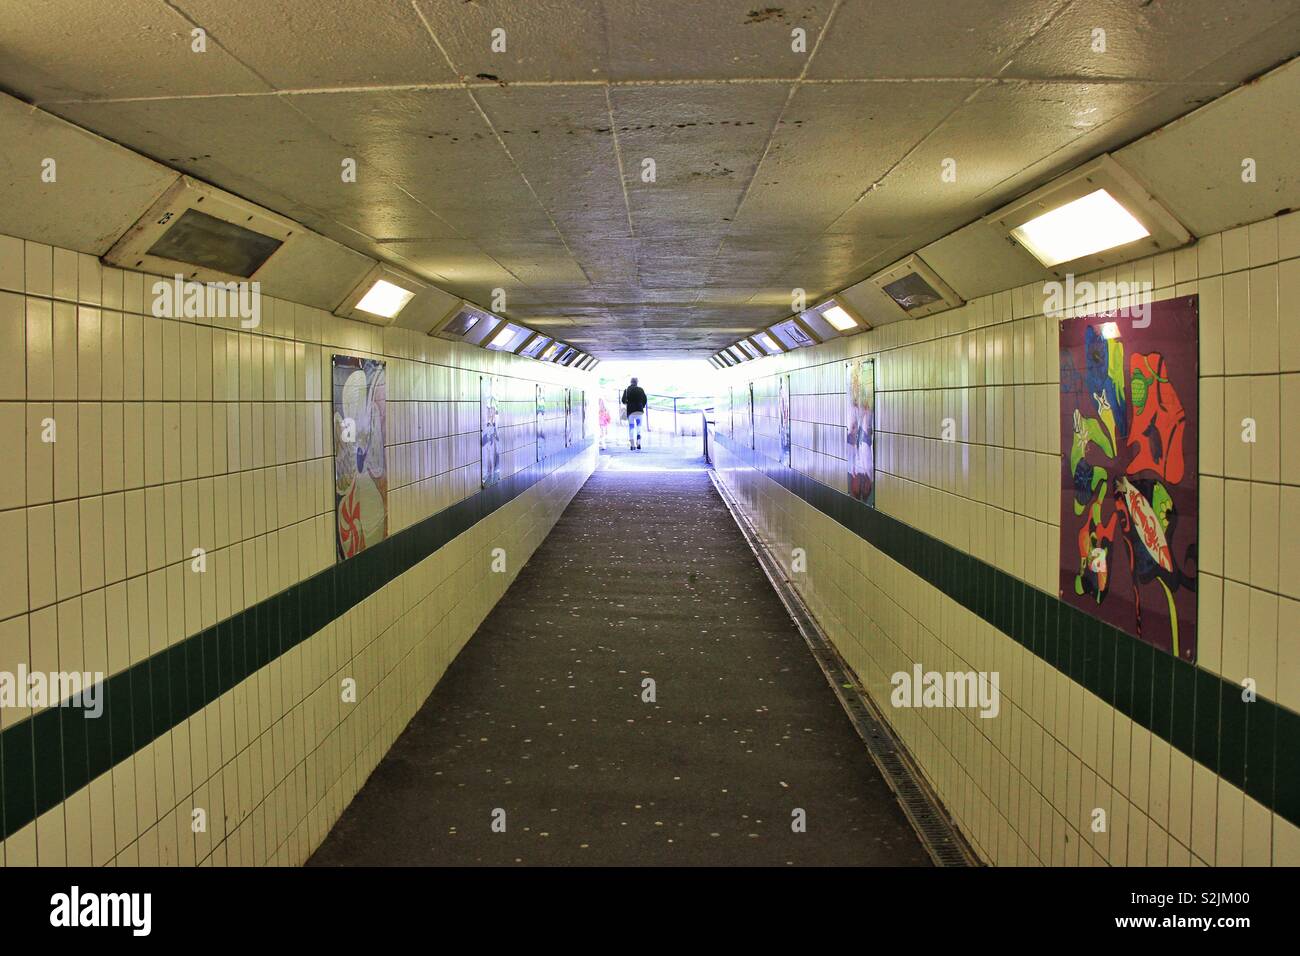 Solitary figure in subway basked in multicoloured light with artwork on display on tiled walls Stock Photo